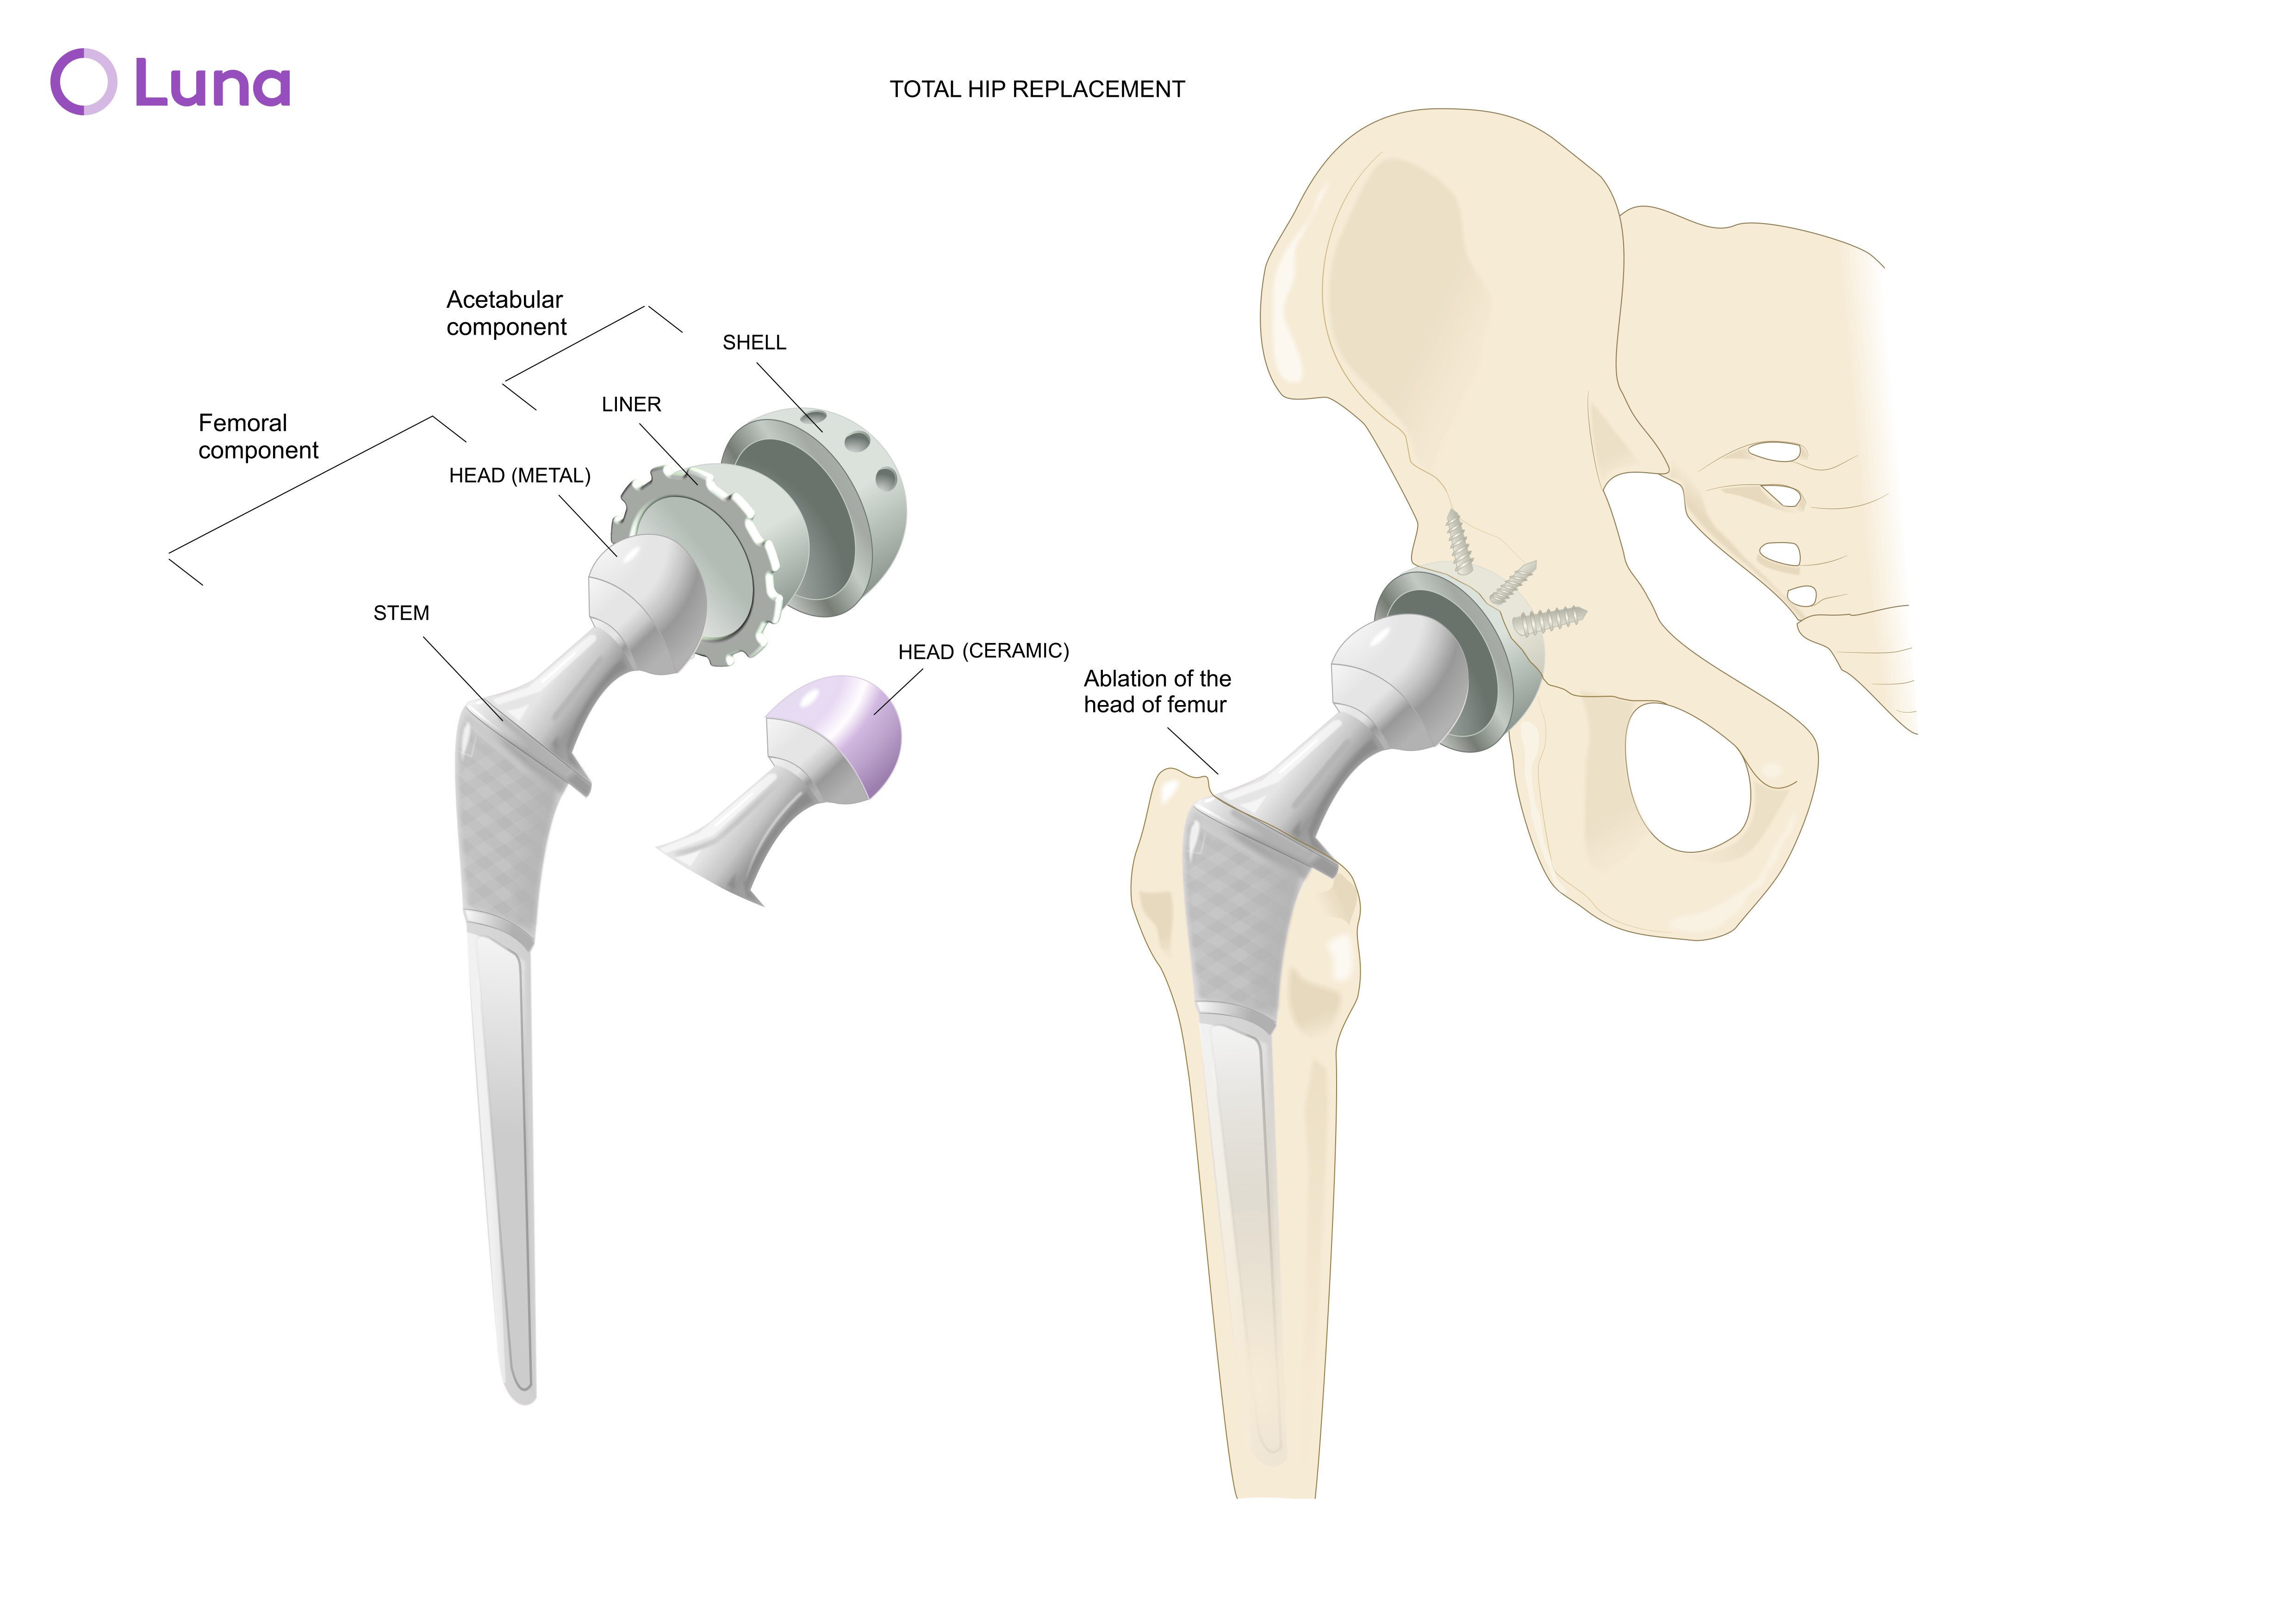 Anterior Hip Replacement - Orthopedic Specialists of Seattle